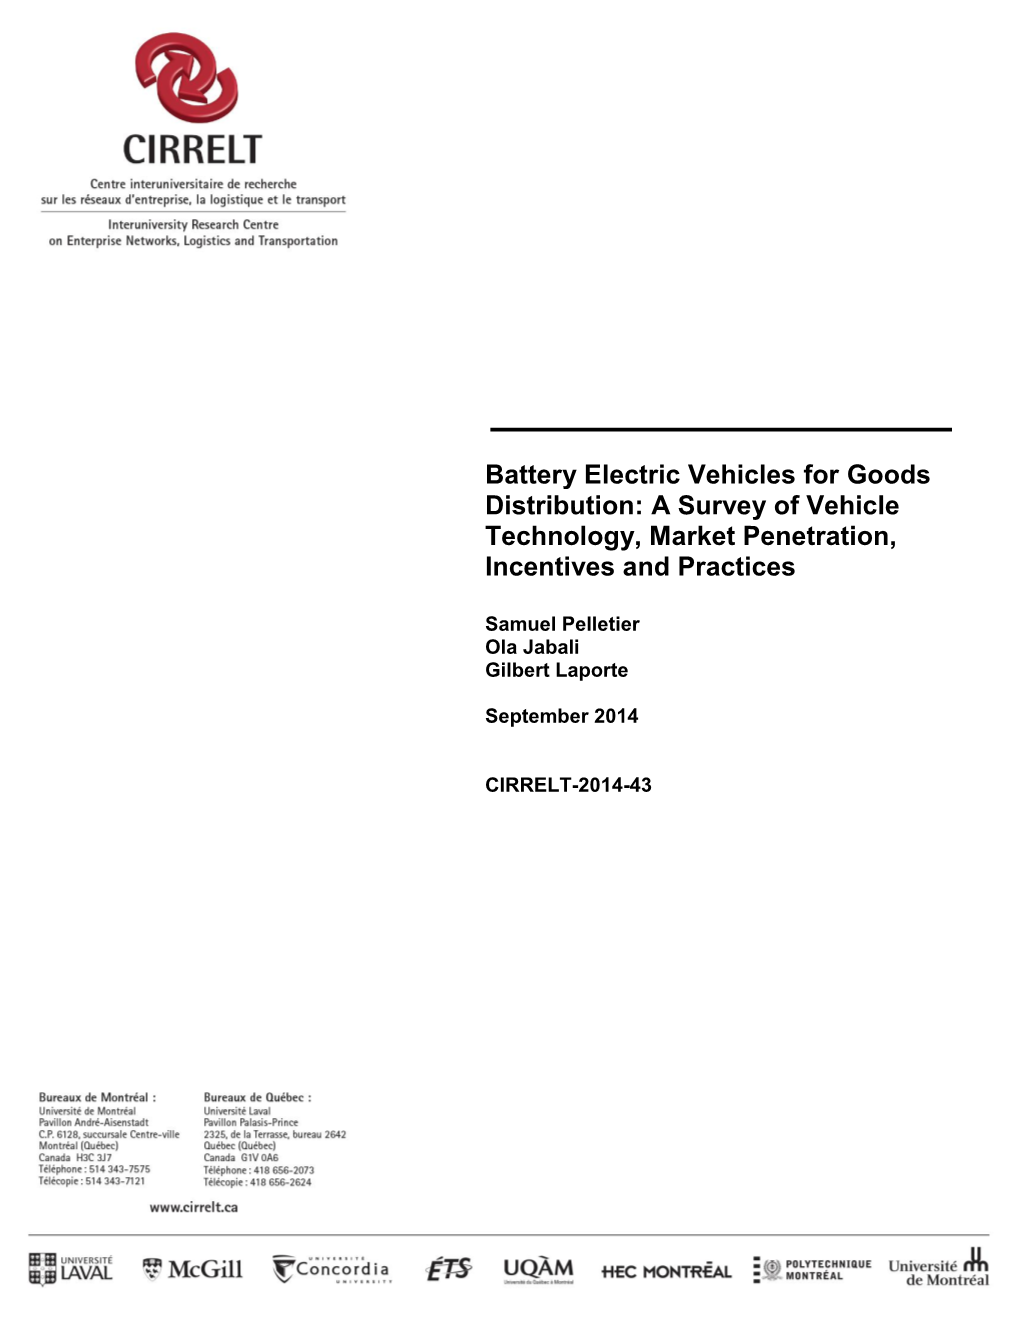 Battery Electric Vehicles for Goods Distribution: a Survey of Vehicle Technology, Market Penetration, Incentives and Practices